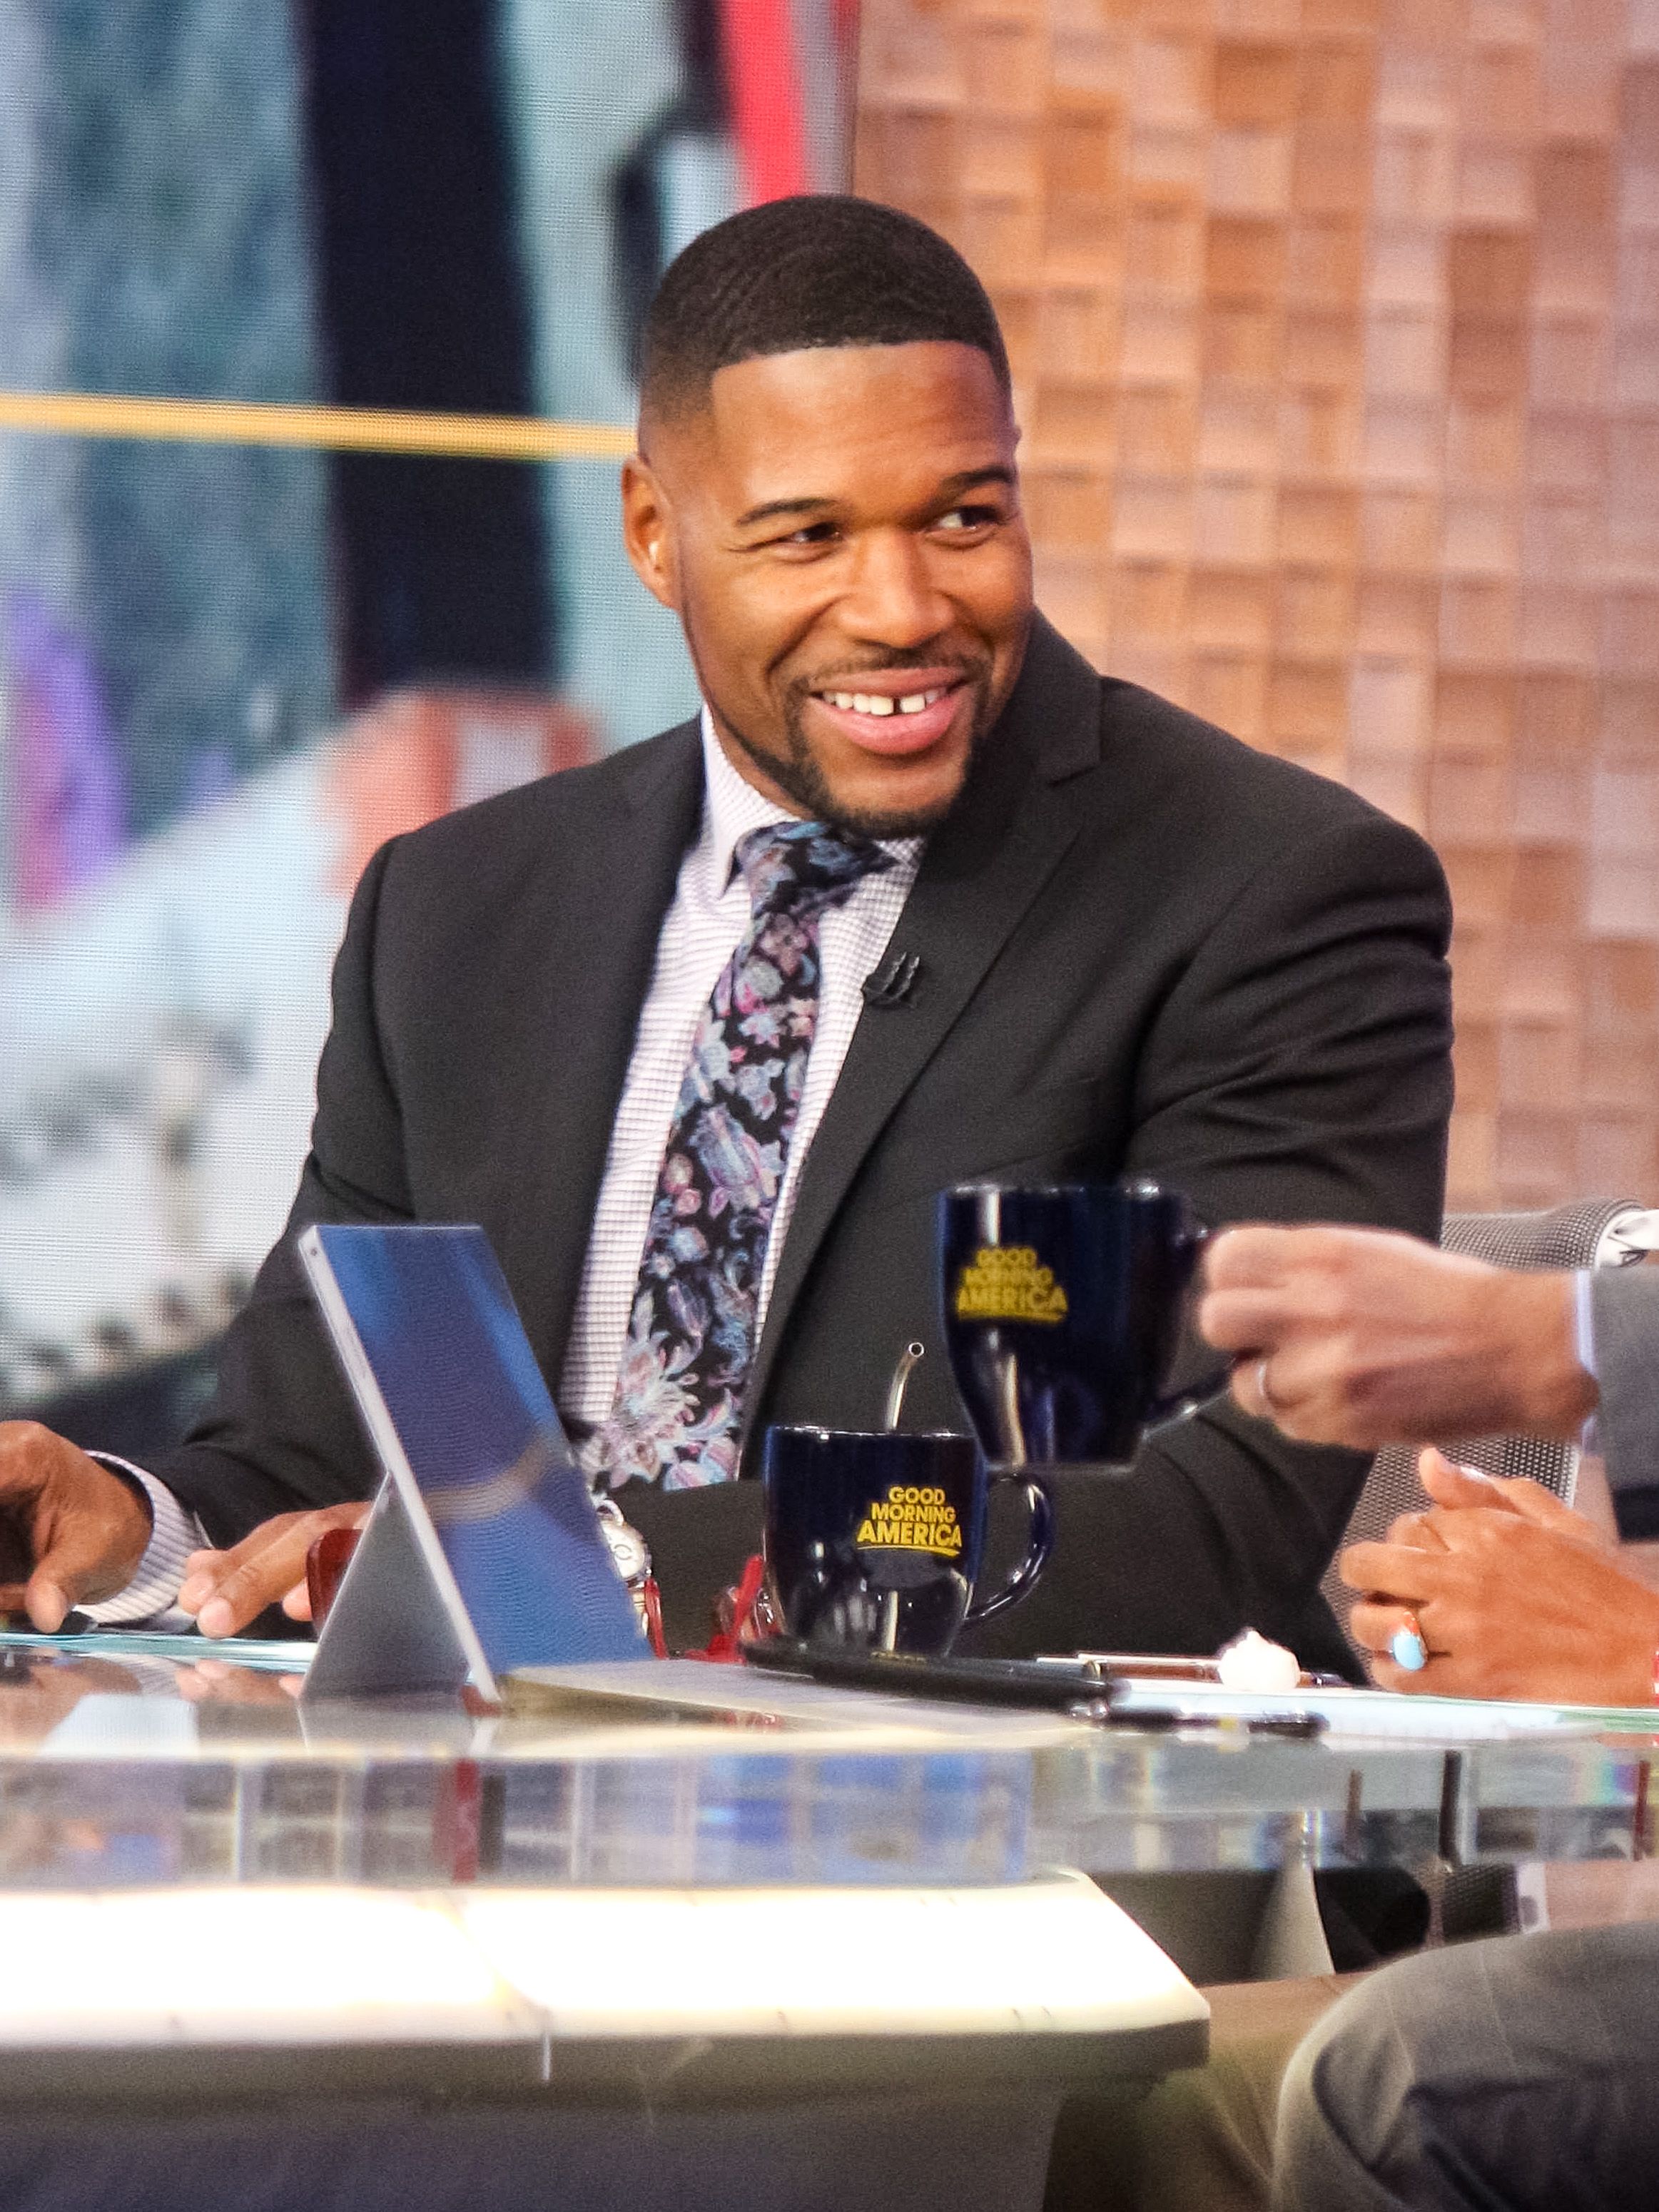 Michael Strahan is seen at "Good Morning America" on October 30, 2019 in New York City | Photo: Getty Images